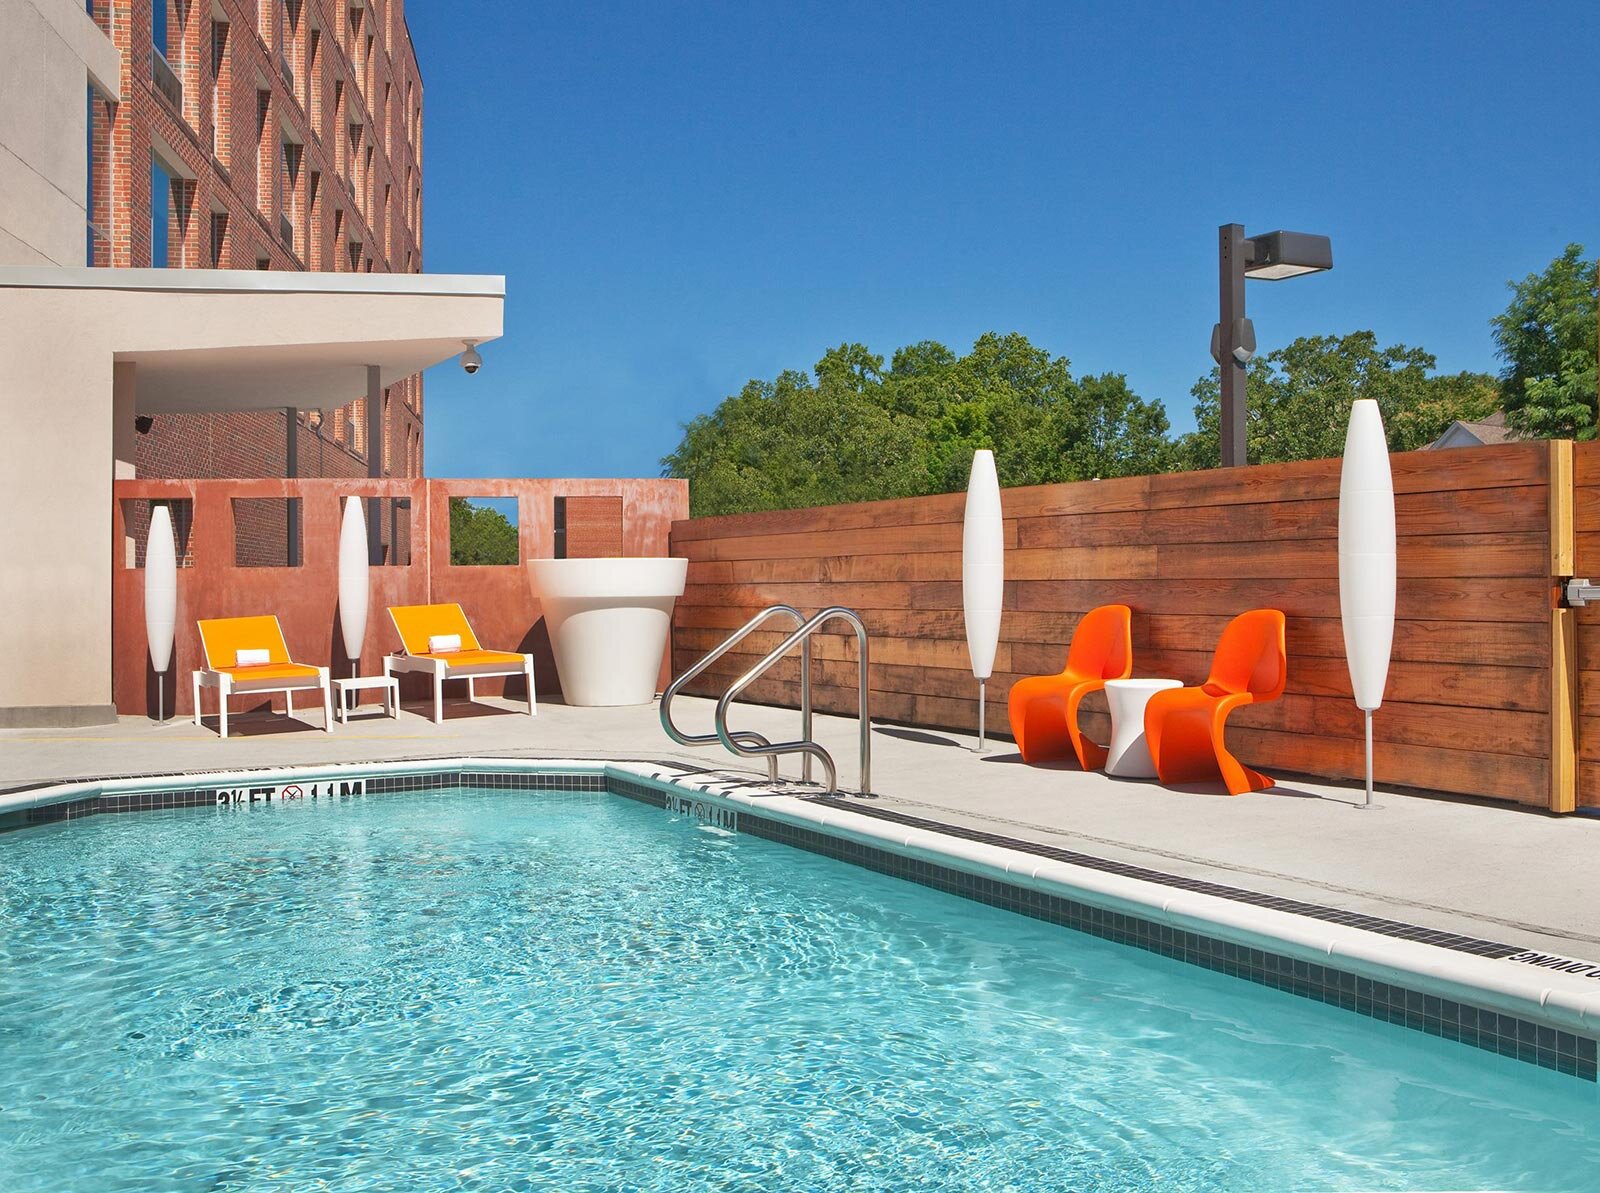 Pool area, lined with bright orange lounge chairs